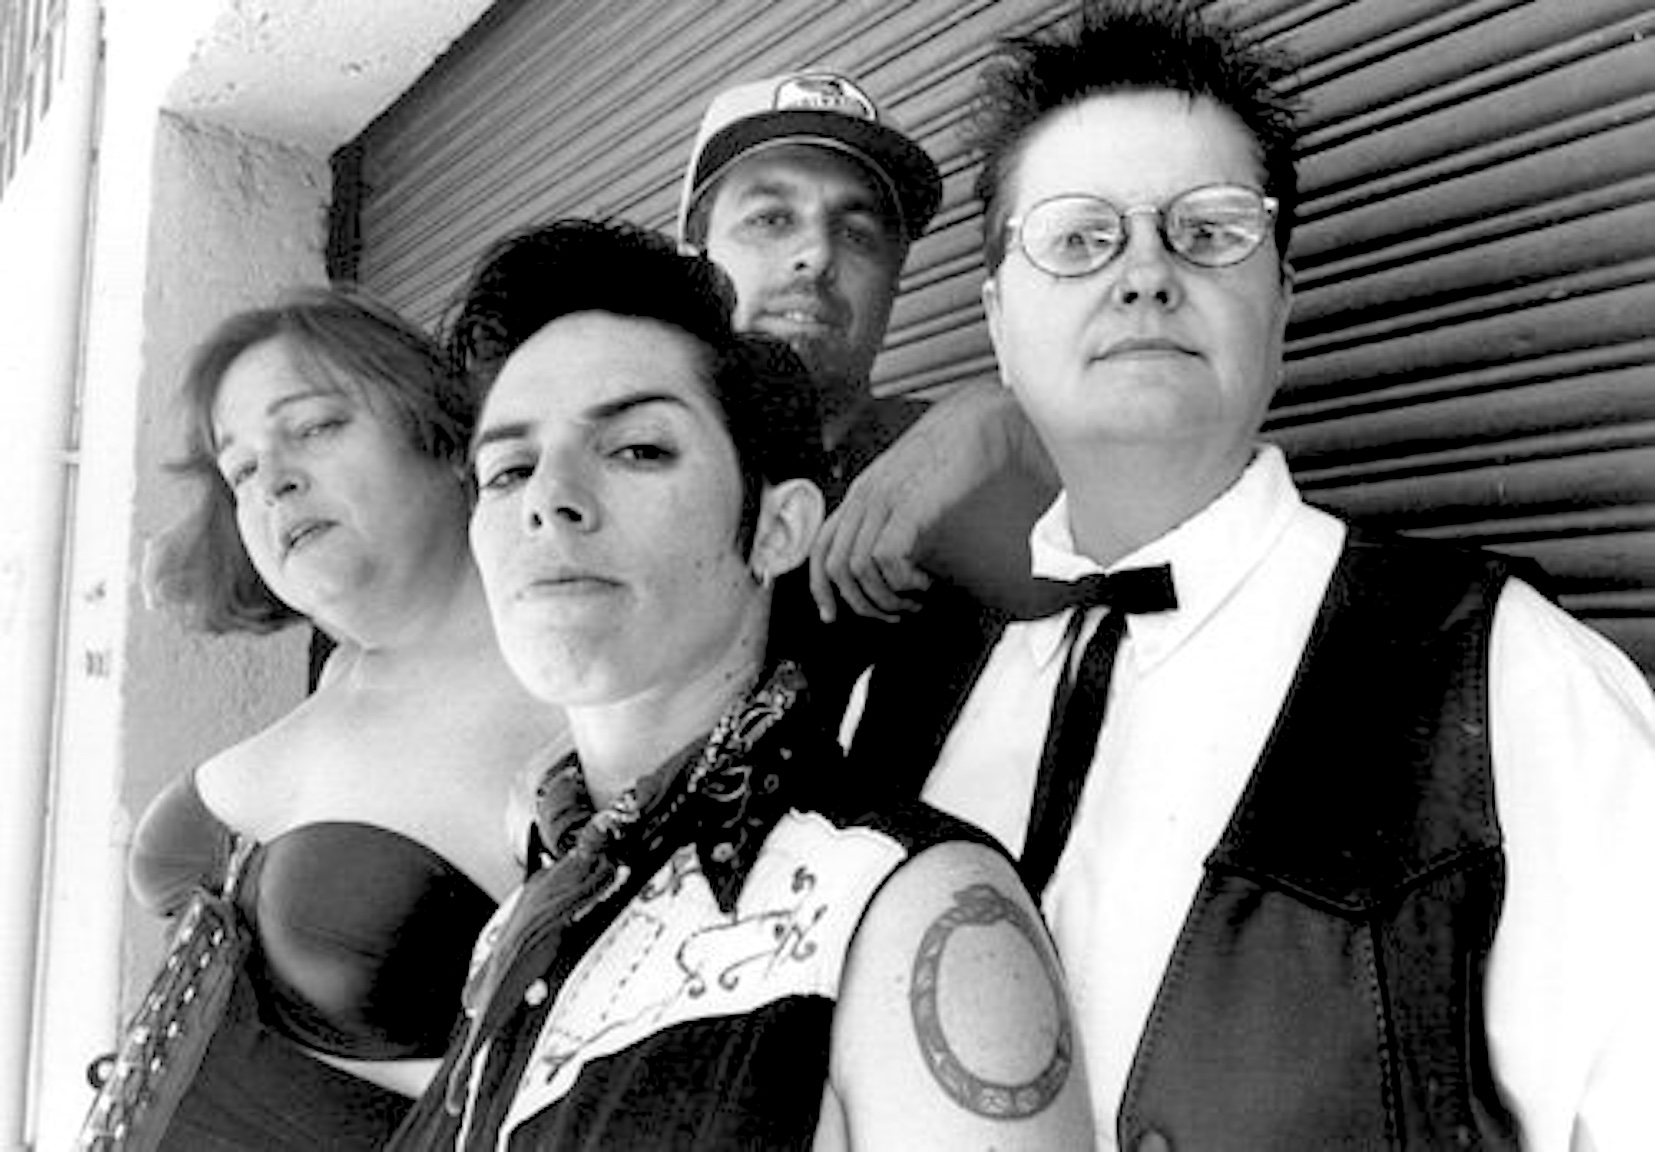 Another promotional photo for the Bucktooth Varmints, a consciously queer “Dykeabilly Band” where Beth played bass, 2010. Photo courtesy of Beth Elliott.